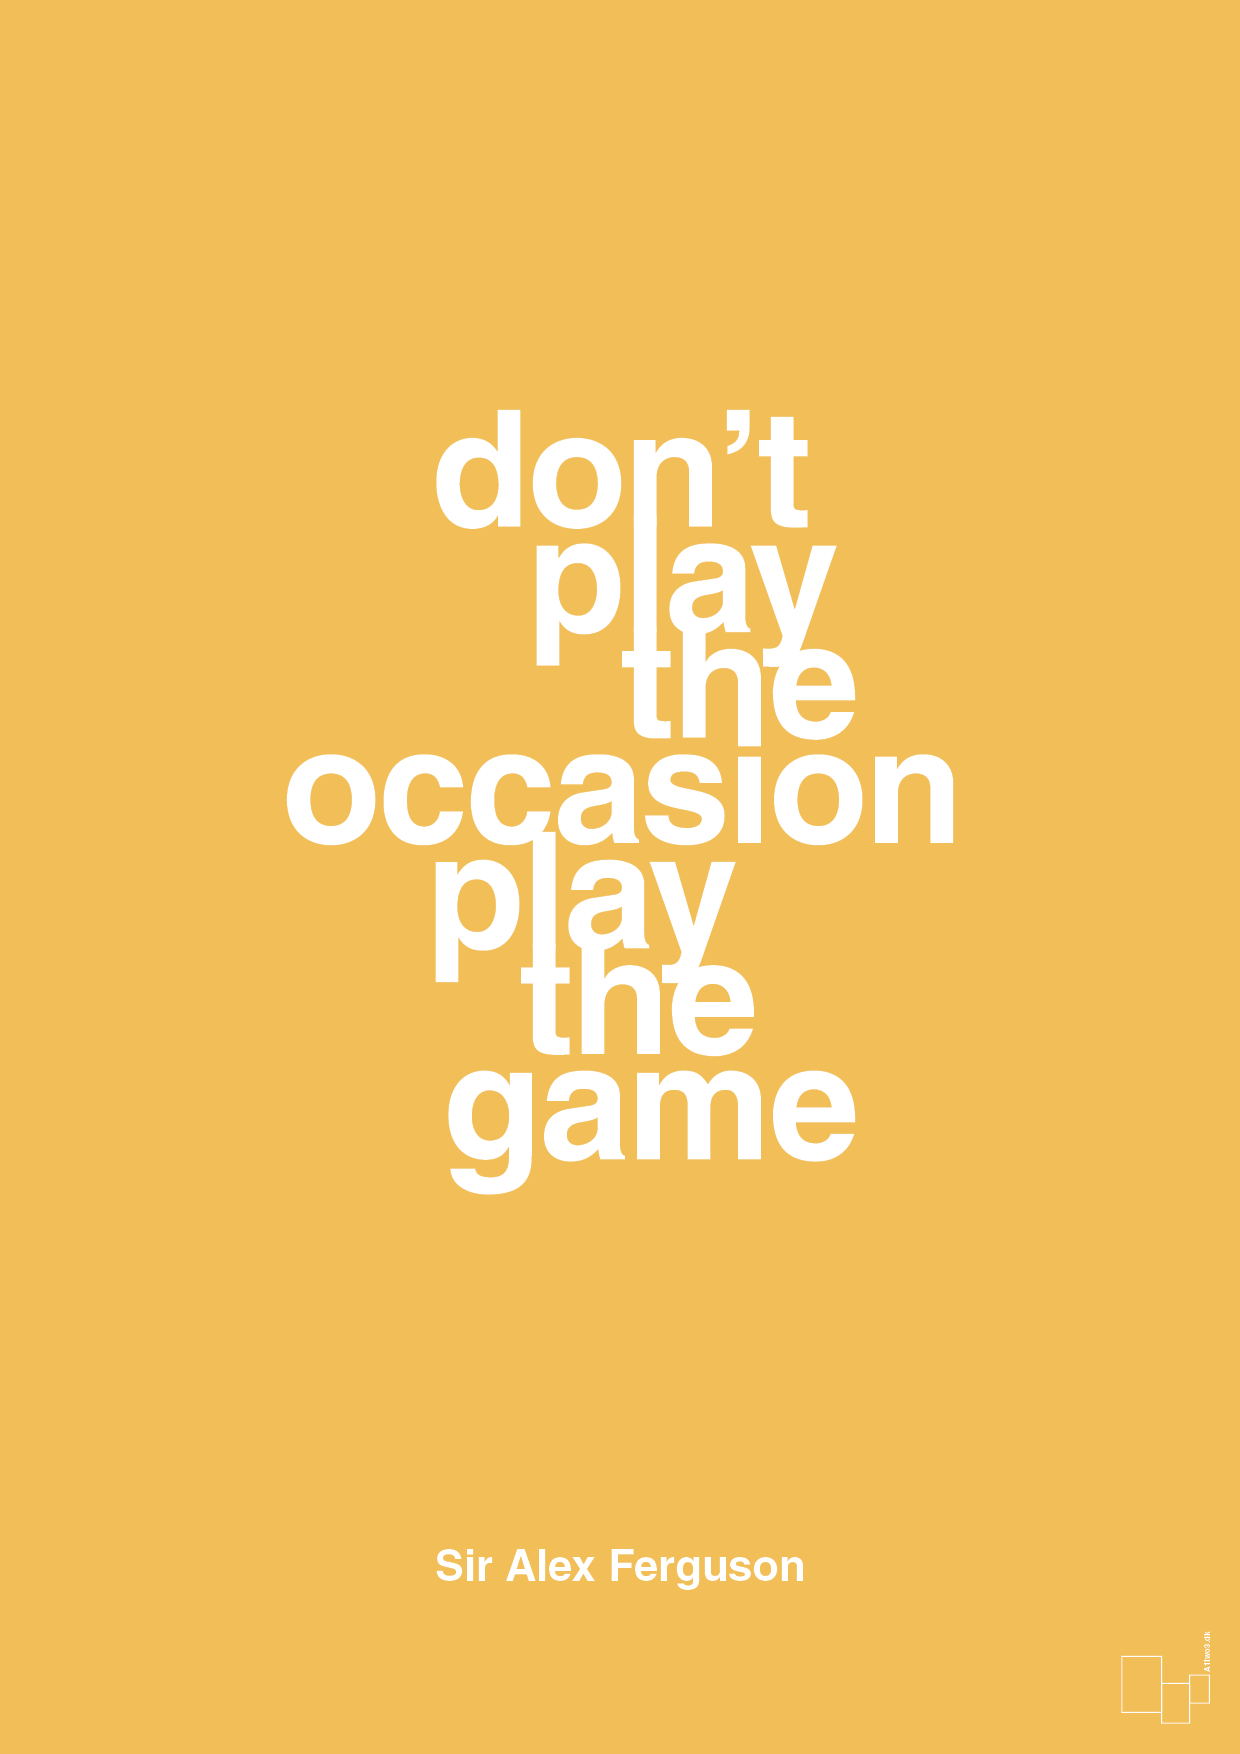 don’t play the occasion play the game - Plakat med Citater i Honeycomb